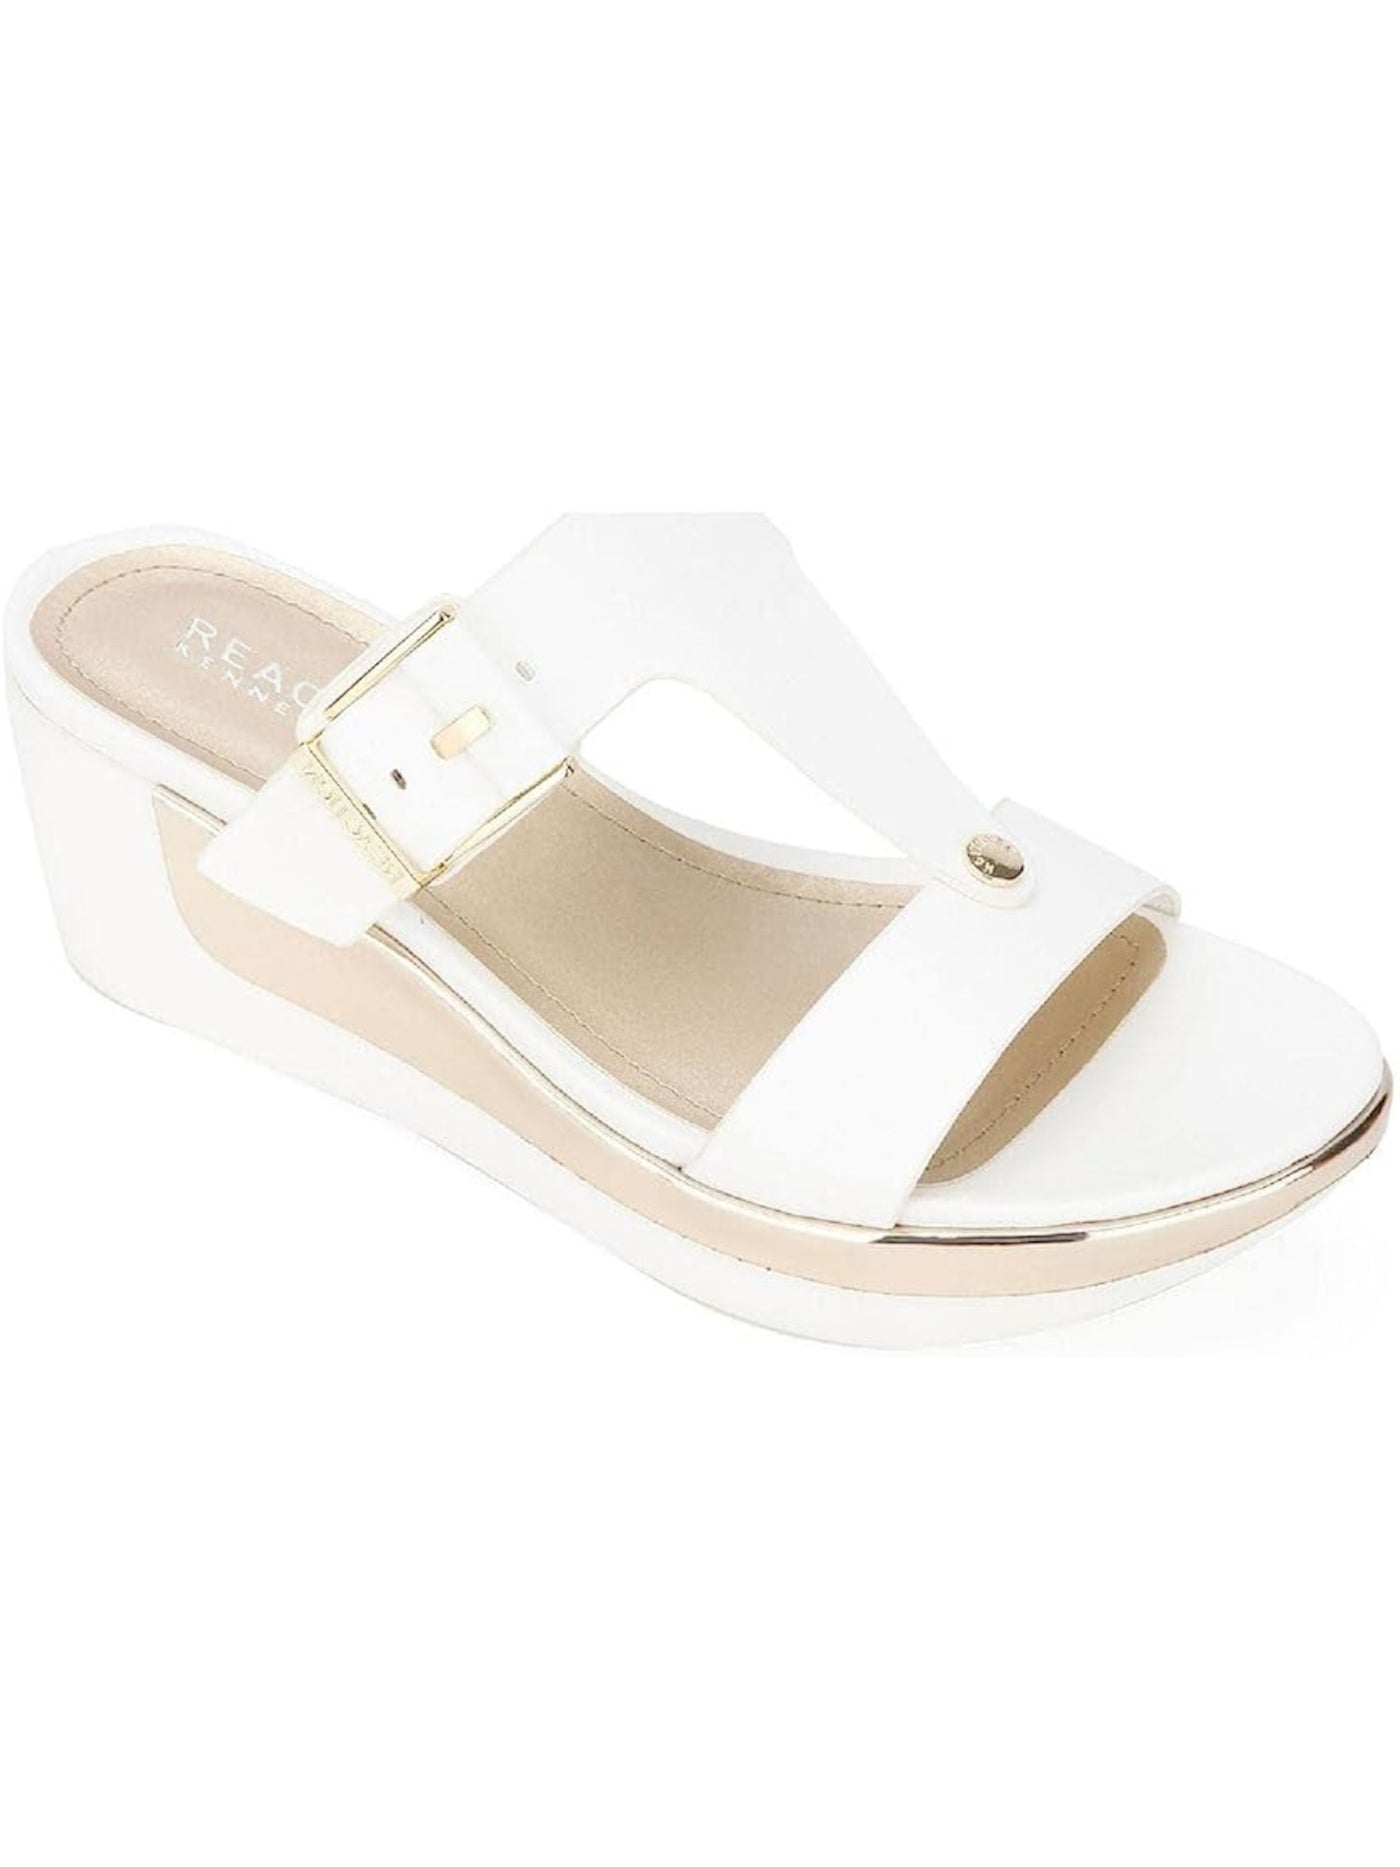 REACTION KENNETH COLE Womens White Buckle Accent 1" Platform Comfort T-Strap Pepea Round Toe Wedge Slip On Sandals Shoes 11